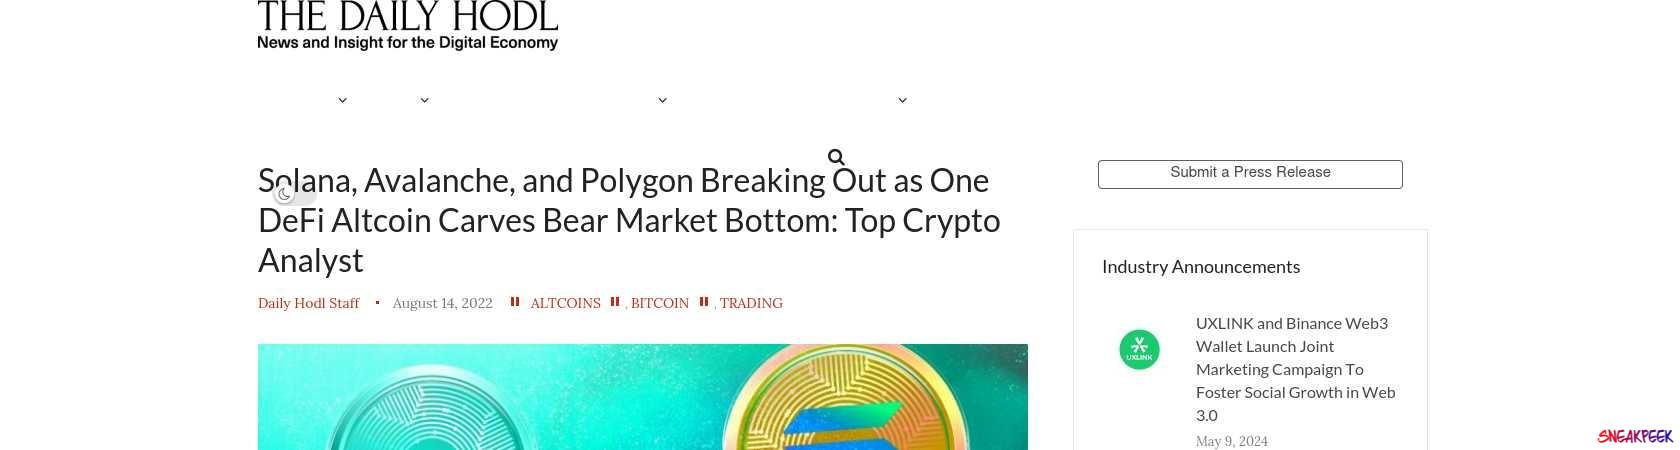 Read the full Article:  ⭲ Solana, Avalanche, and Polygon Breaking Out as One DeFi Altcoin Carves Bear Market Bottom: Top Crypto Analyst